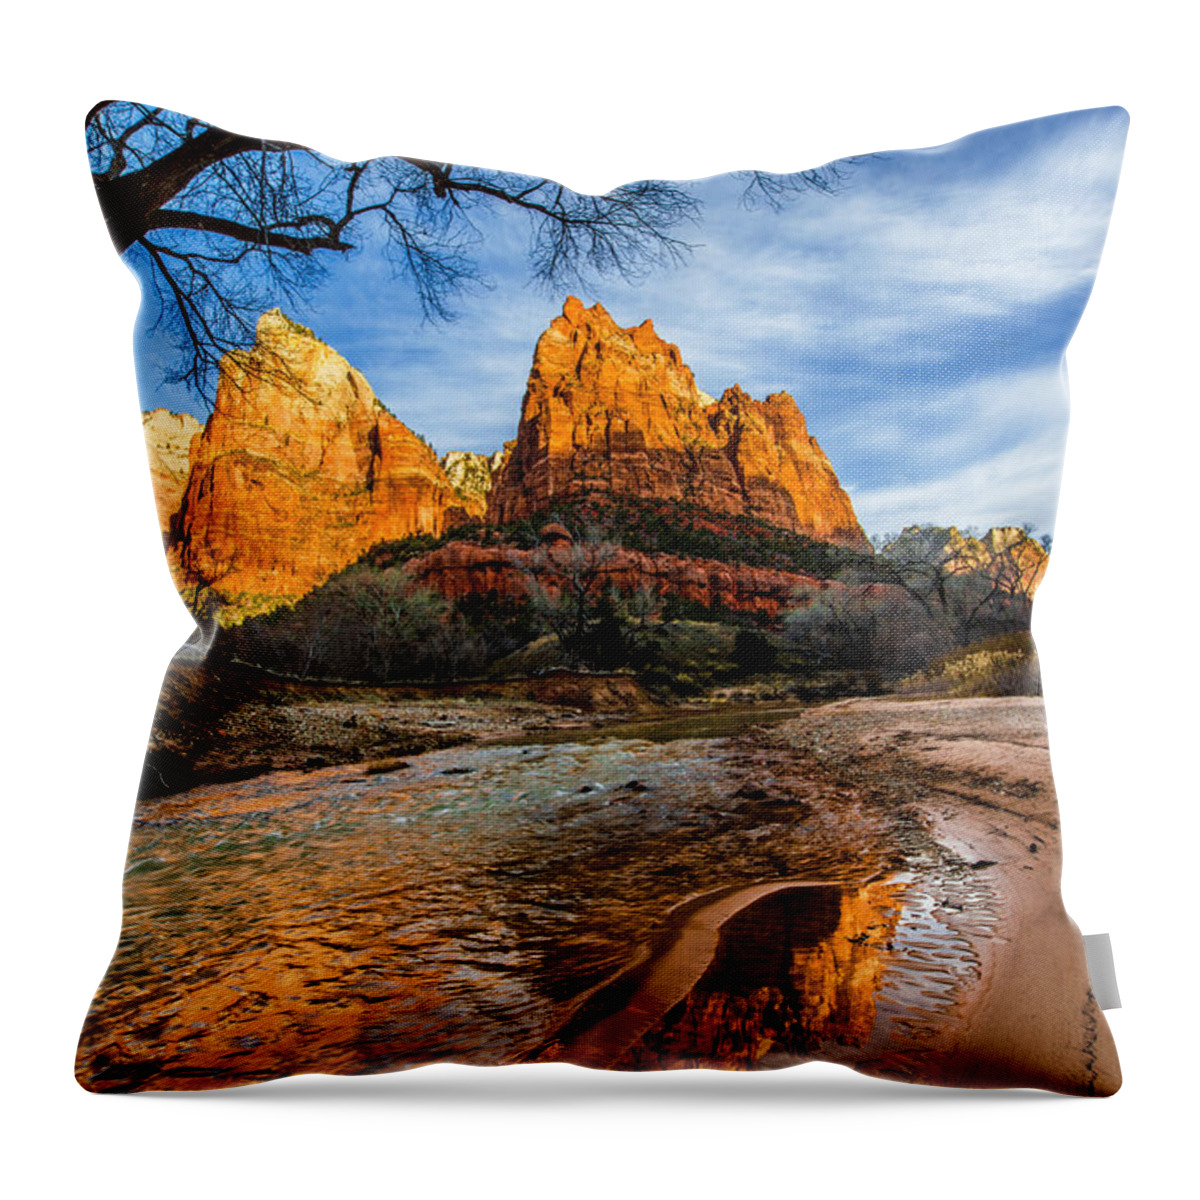 Patriarchs Of Zion Throw Pillow featuring the photograph Patriarchs of Zion by Chad Dutson